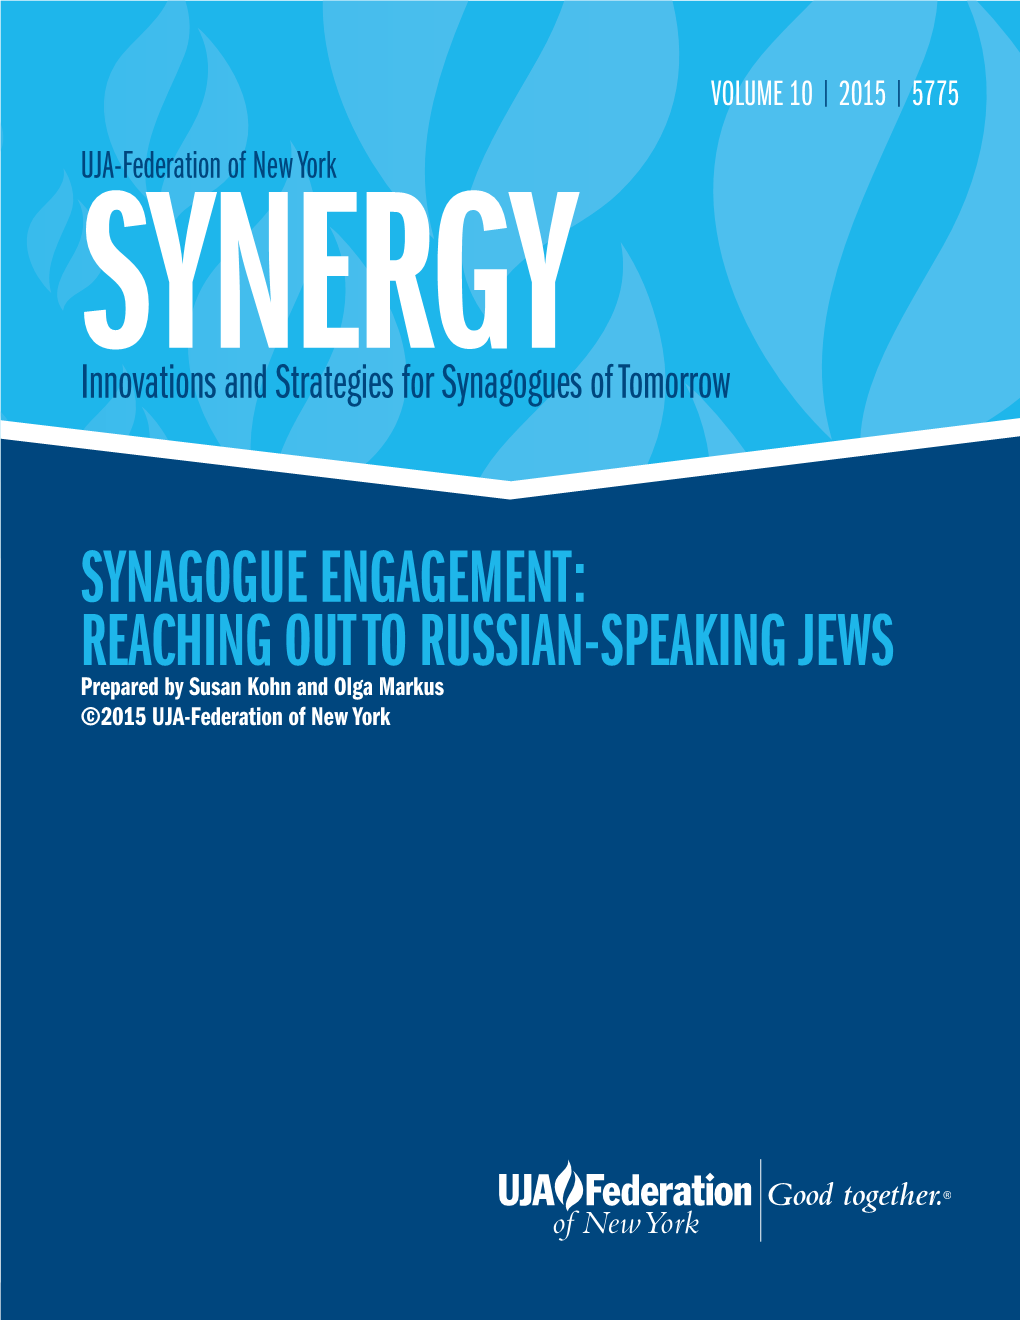 Reaching out to Russian-Speaking Jews Prepared by Susan Kohn and Olga Markus ©2015 UJA-Federation of New York